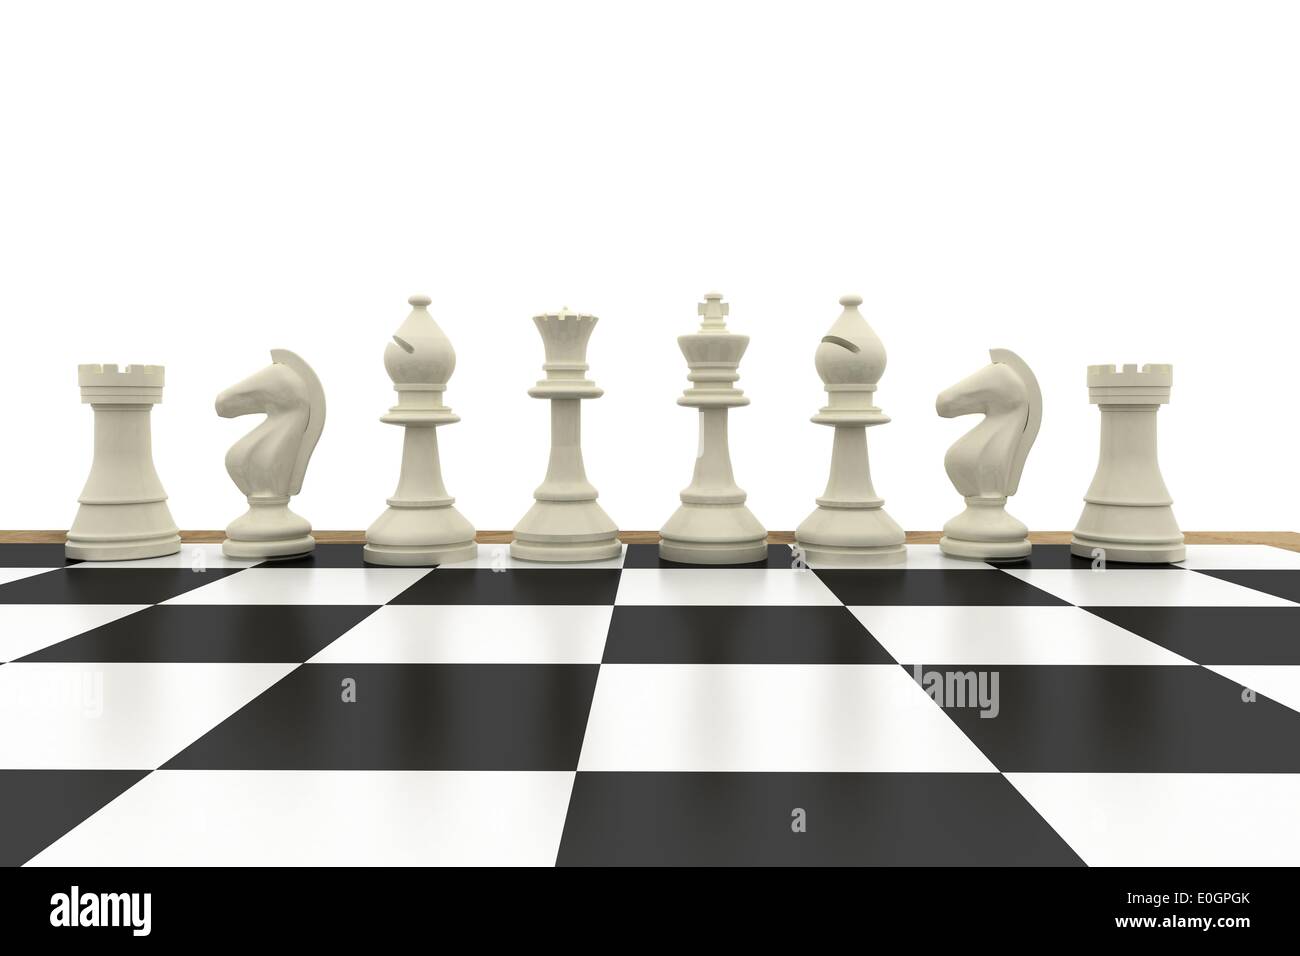 White chess pieces on board Stock Photo